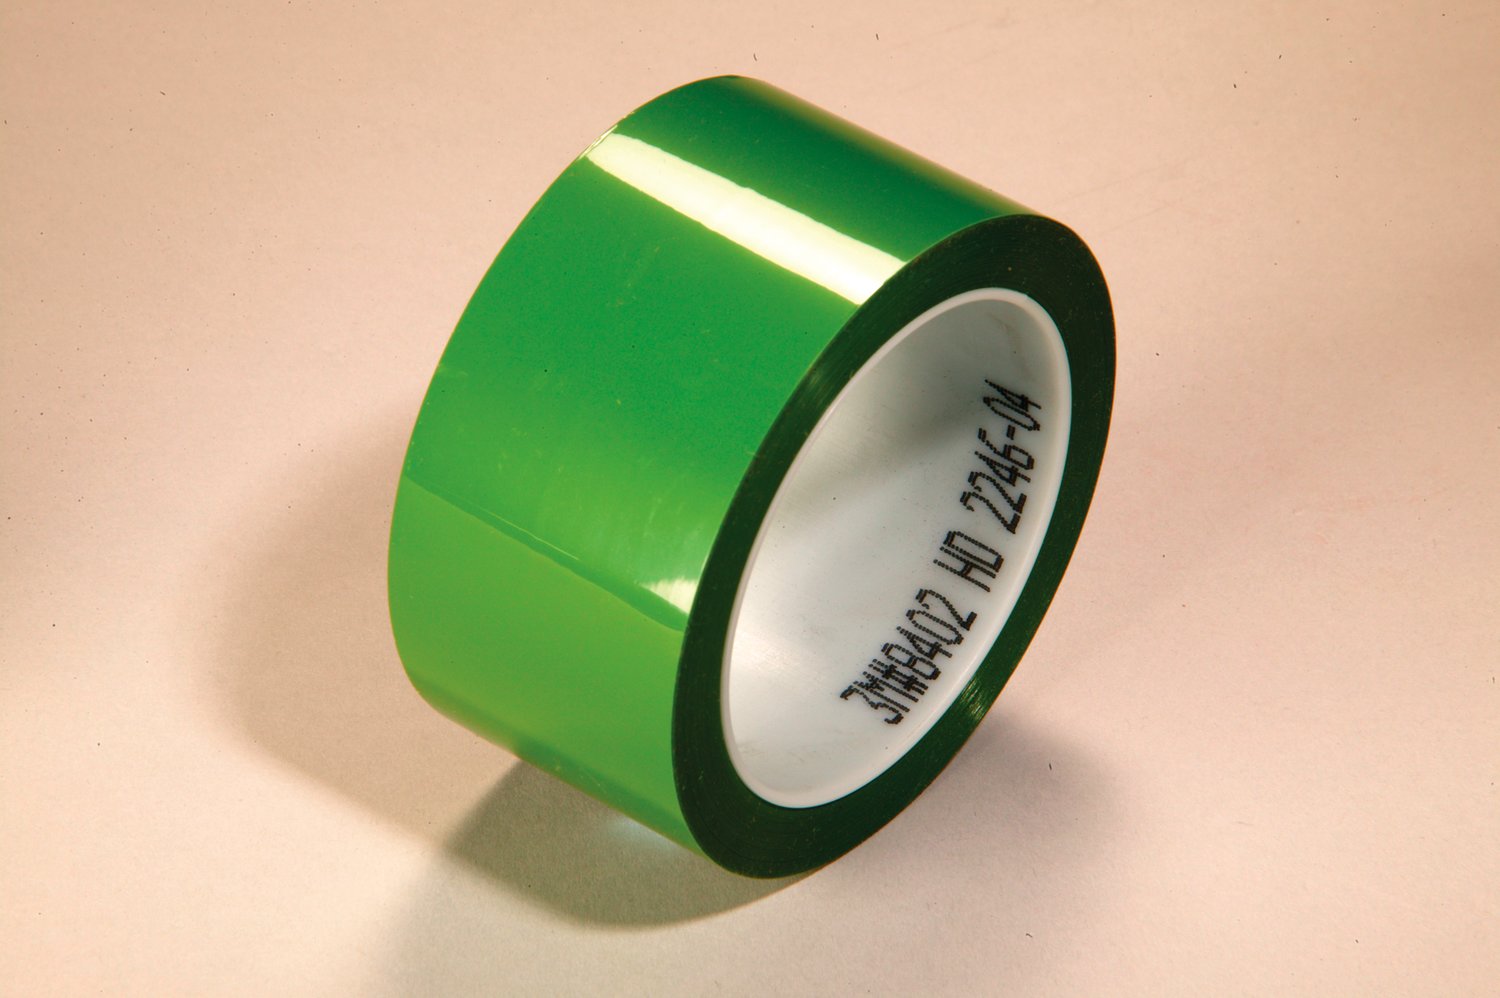 7010312097 - 3M Polyester Tape 8402, Green, 1.9 mil, 1 1/2 in x 36 yd, 32 rolls per
case